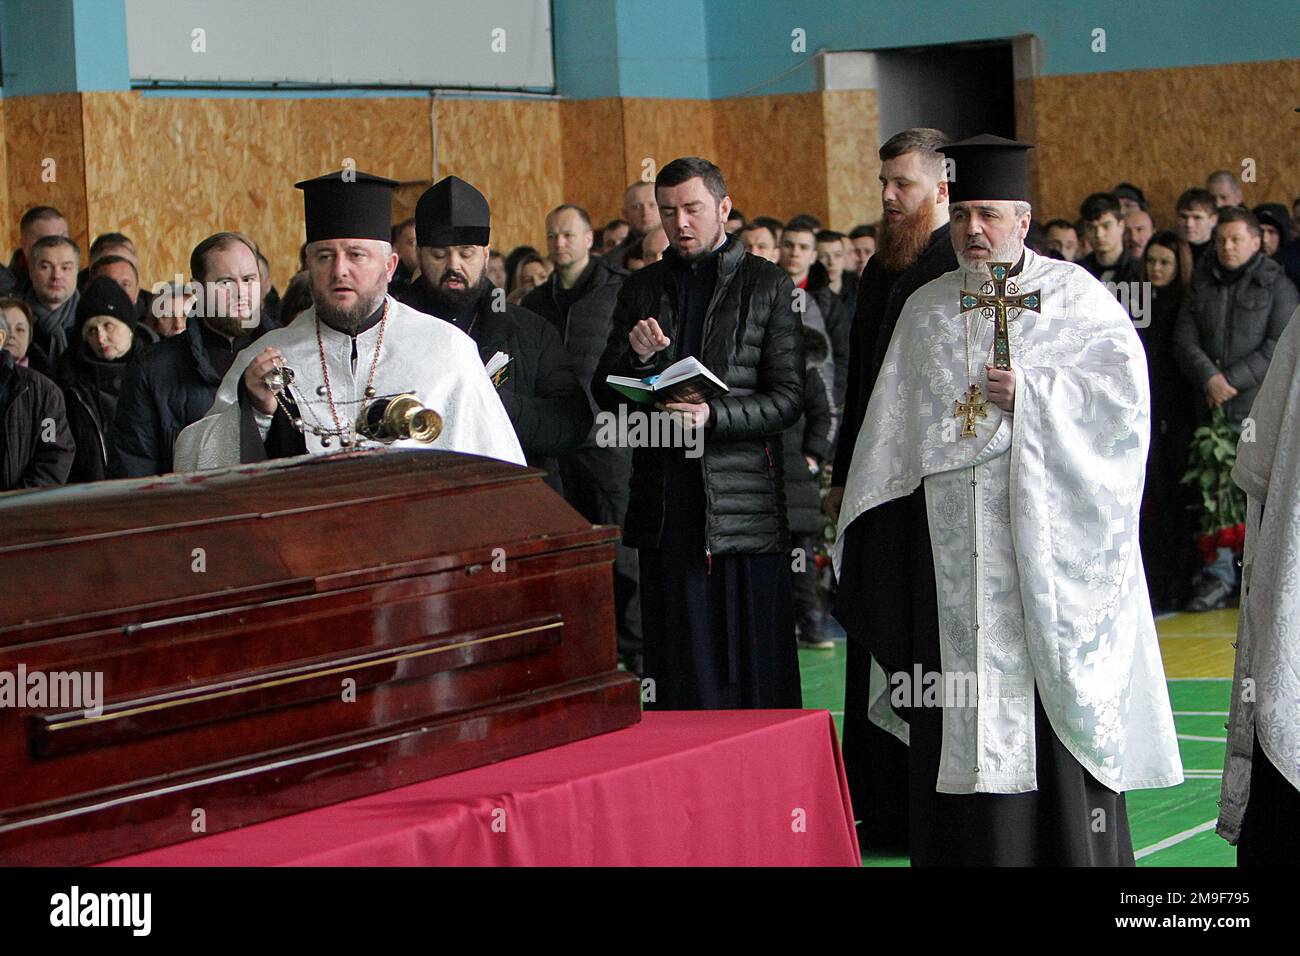 DNIPRO, UKRAINE - JANUARY 17, 2023 - Priests conduct the funeral service of Ukrainian boxer, Merited Coach of Ukraine and head coach of the boxing tea Stock Photo